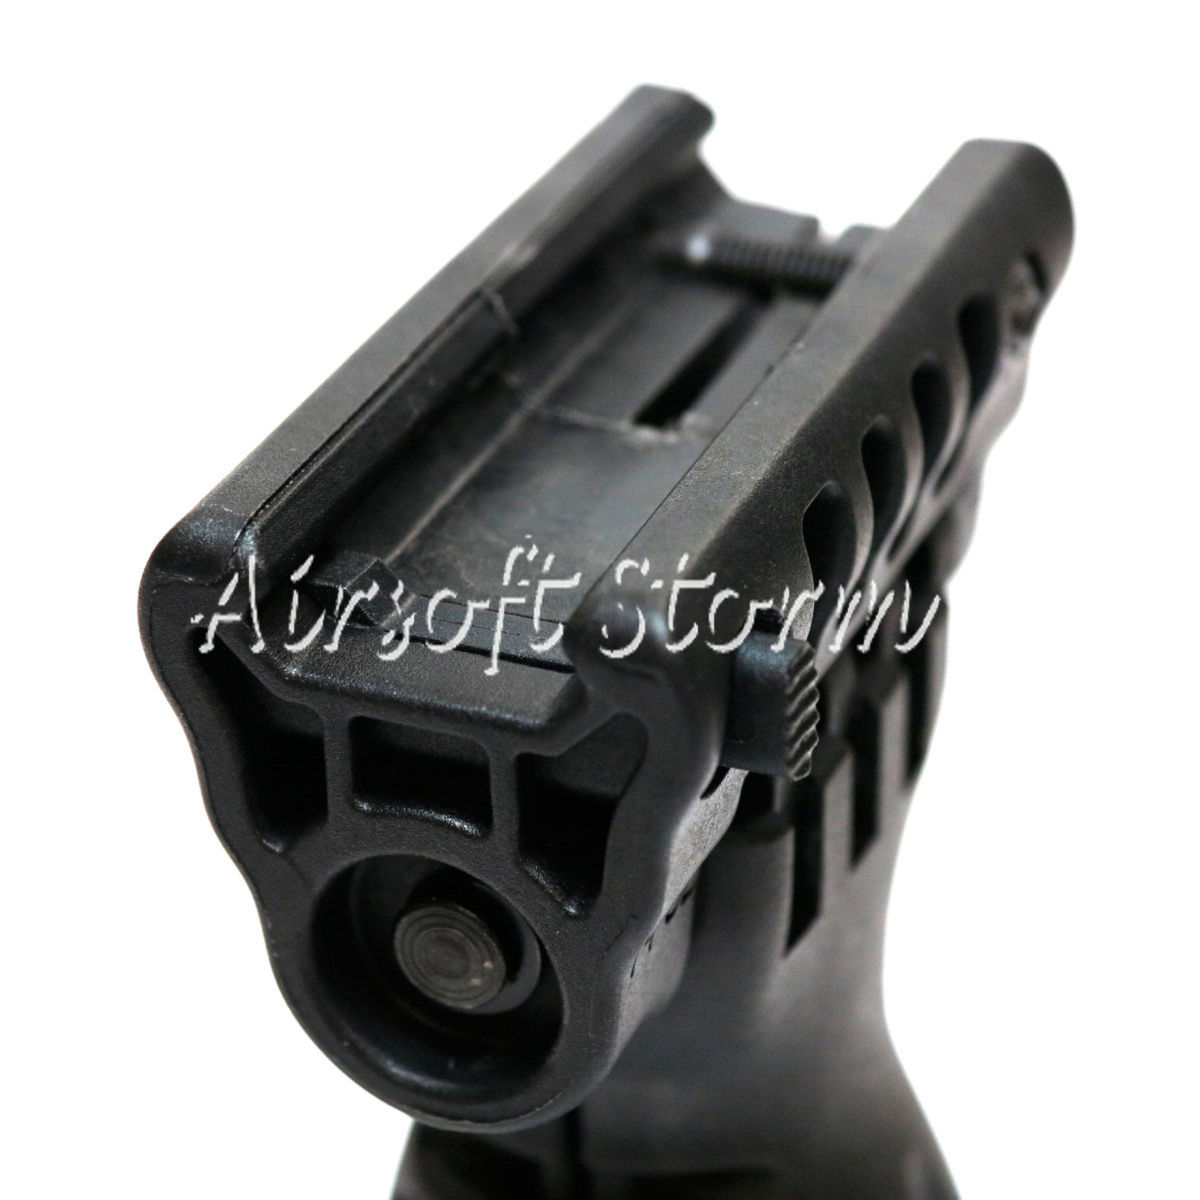 Airsoft Tactical Gear 20mm RIS Spring Total Bipod Foregrip Grip Black